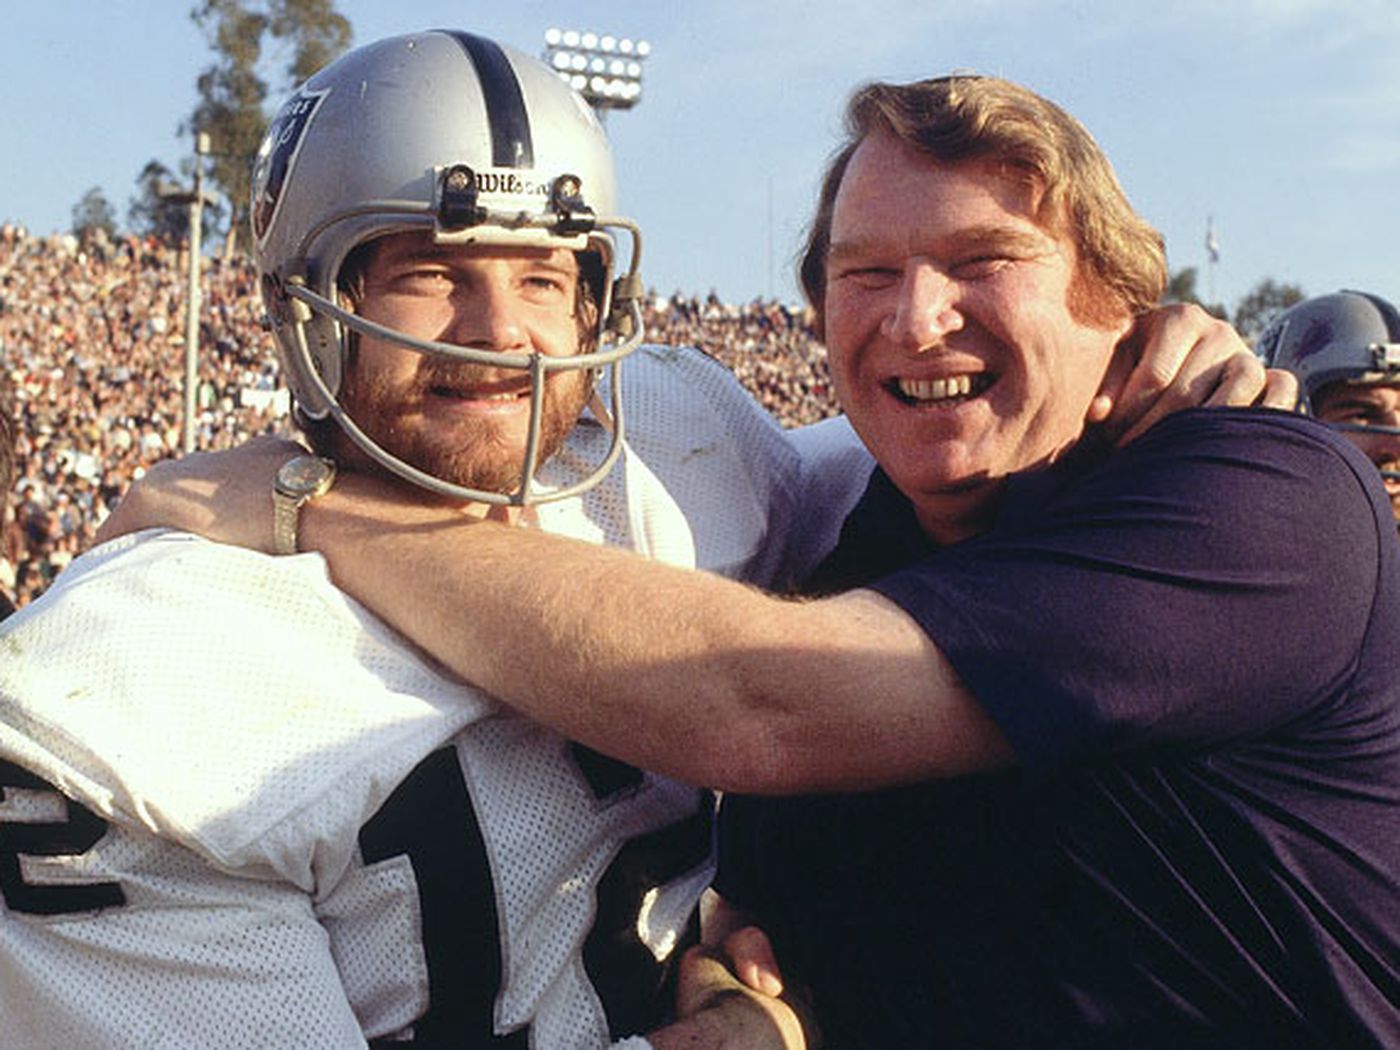 Ken Stabler and John Madden..love Raiders royalty light and tears when we look at this photograph!